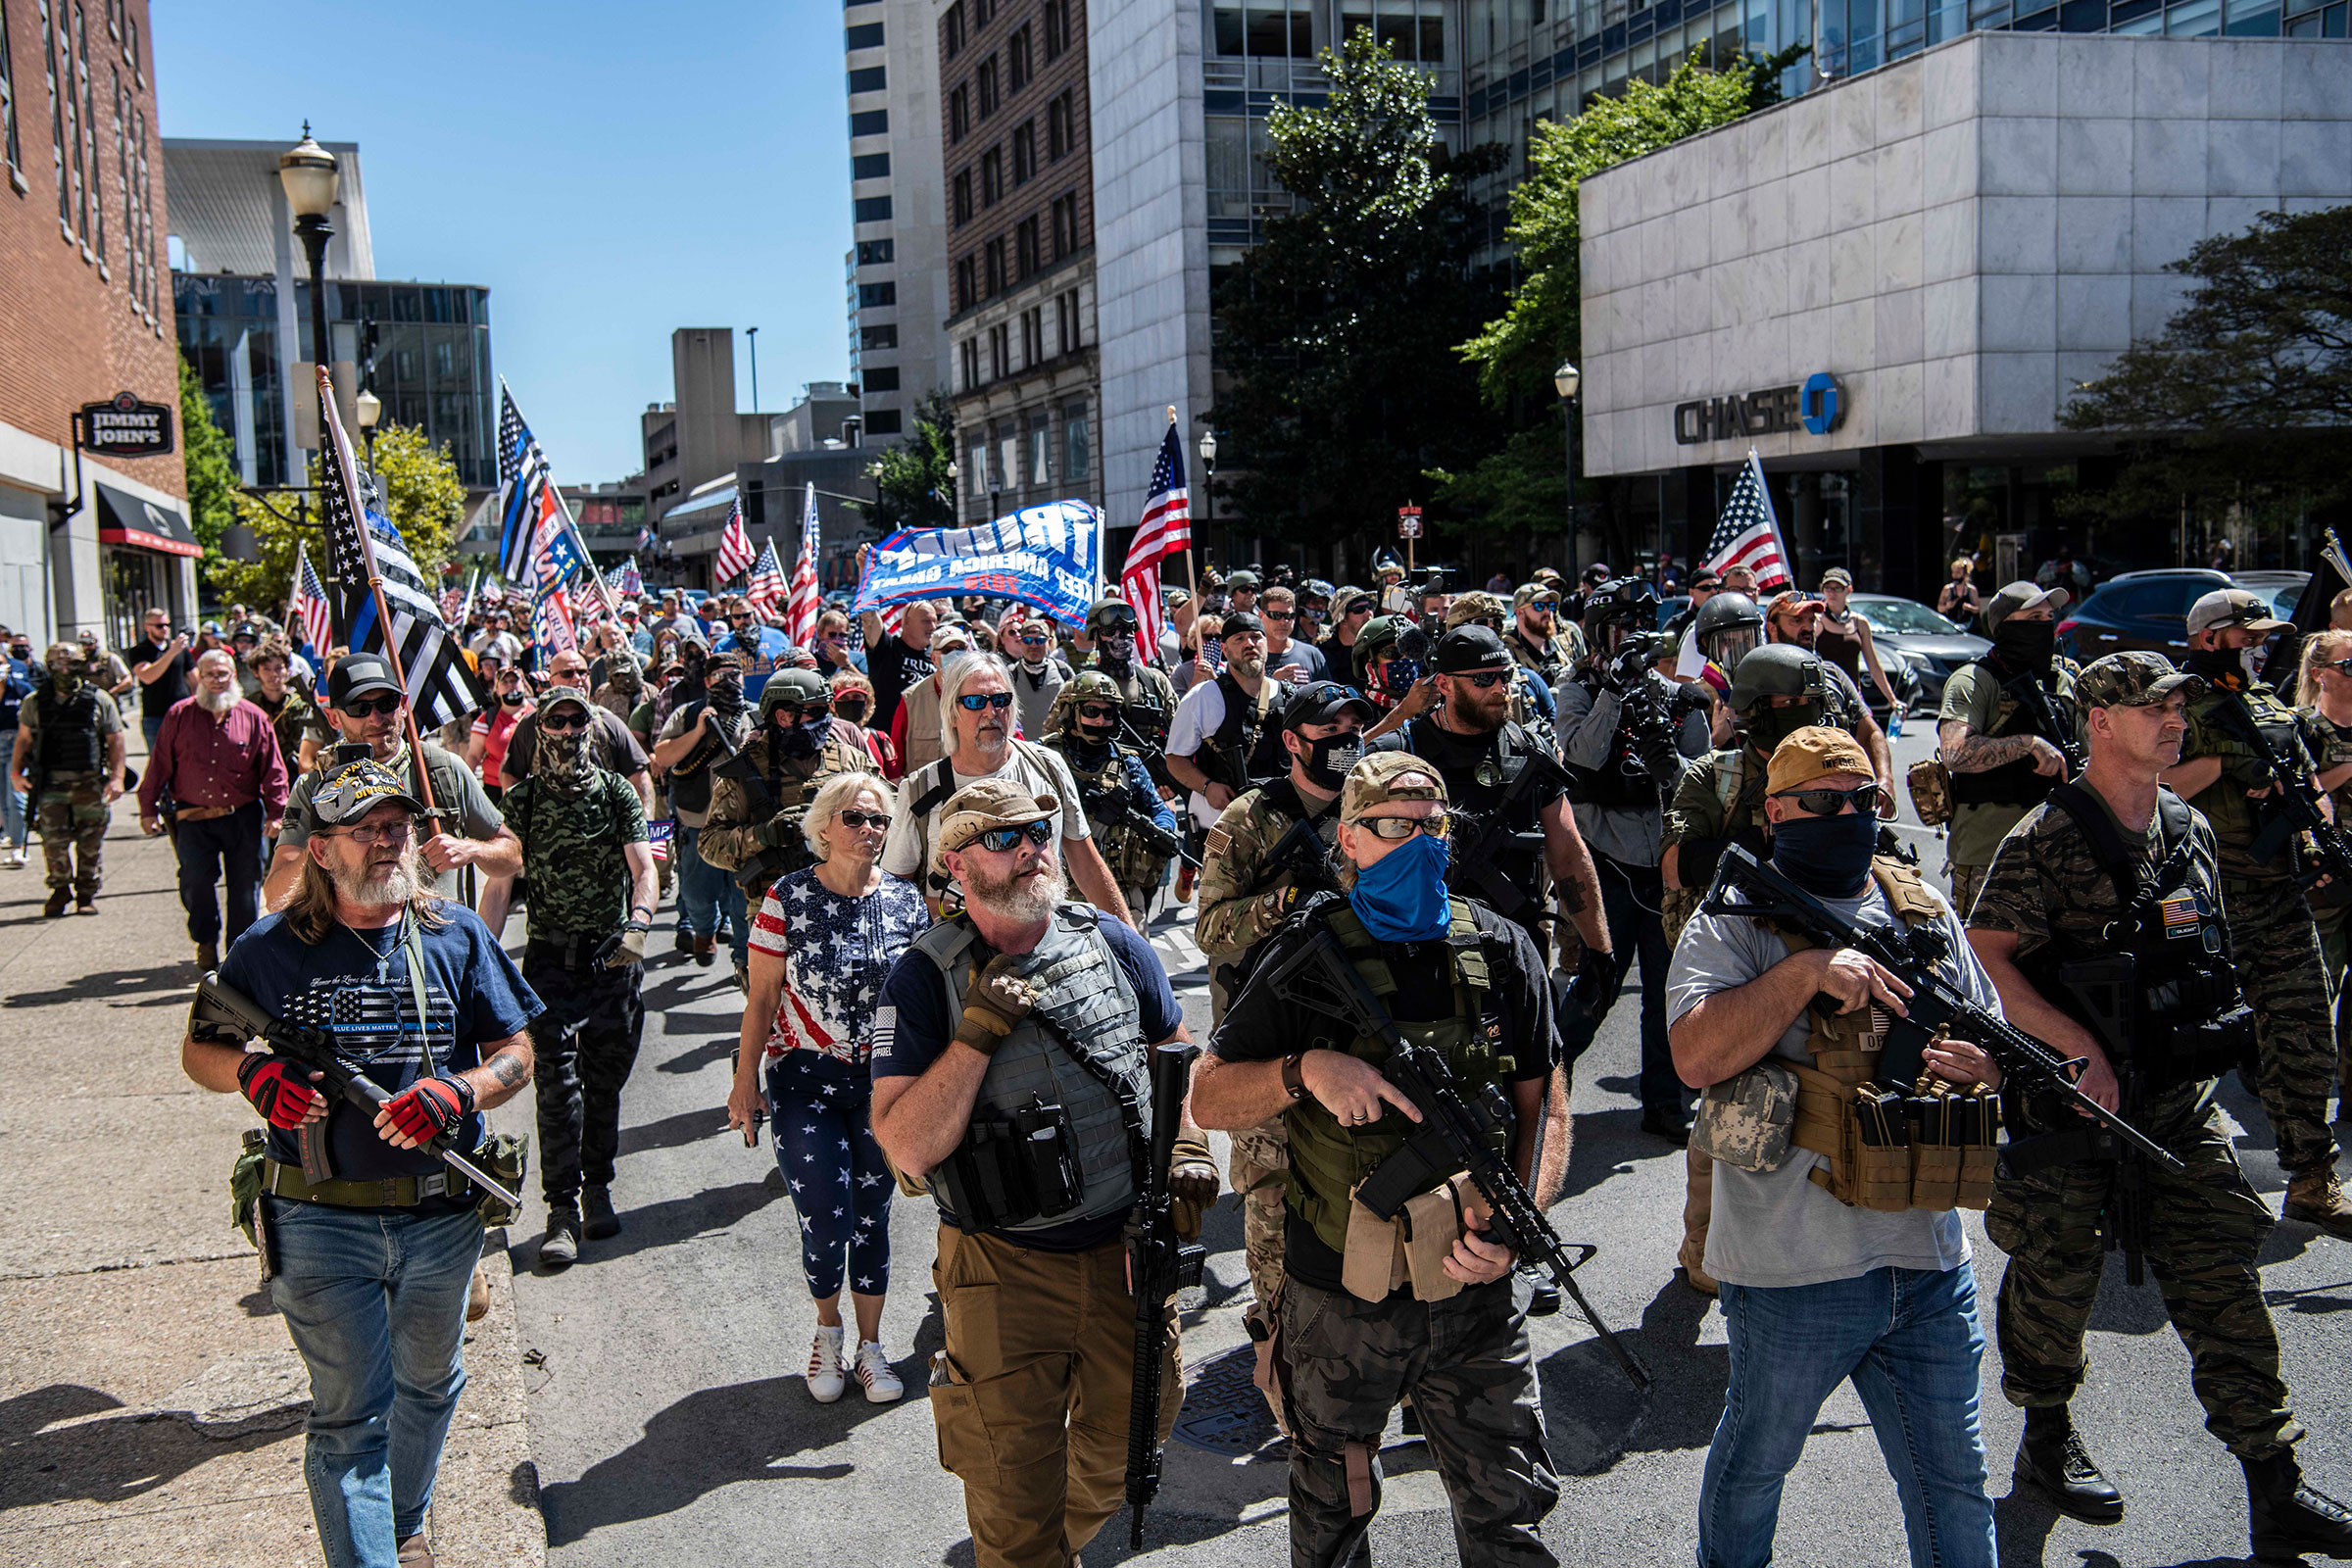 Armed pro-trump militia members during a demonstartion on the day of the Kentucky Derby in Louisville, Ky., September 5, 2020. (Alex Lourie—Redux)